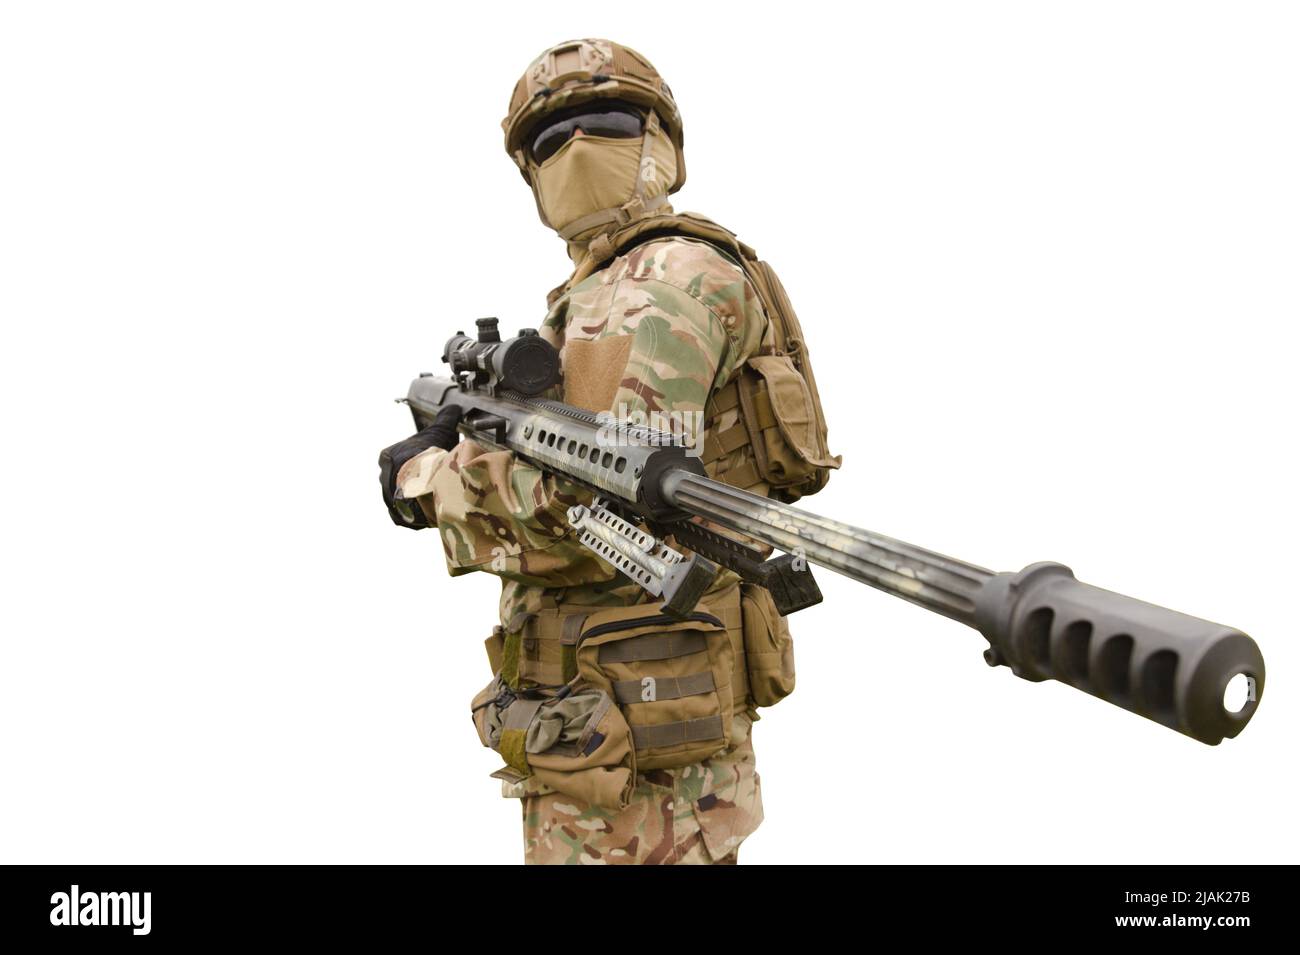 Special forces soldier with sniper rifle, isolated on white background. Stock Photo